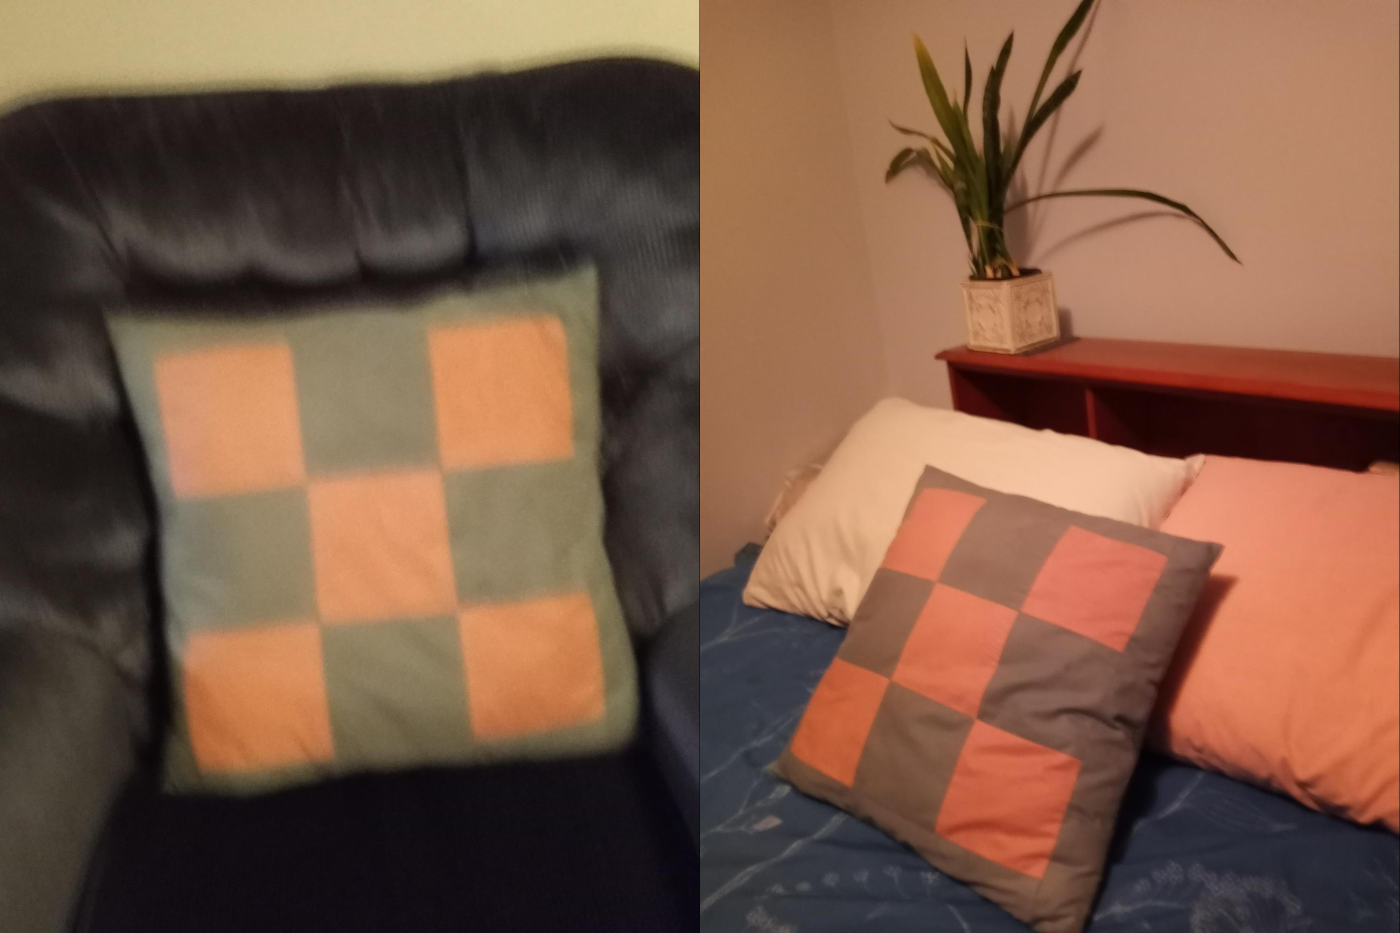 Two pictures of Kerri's pillow, one blurry, one not